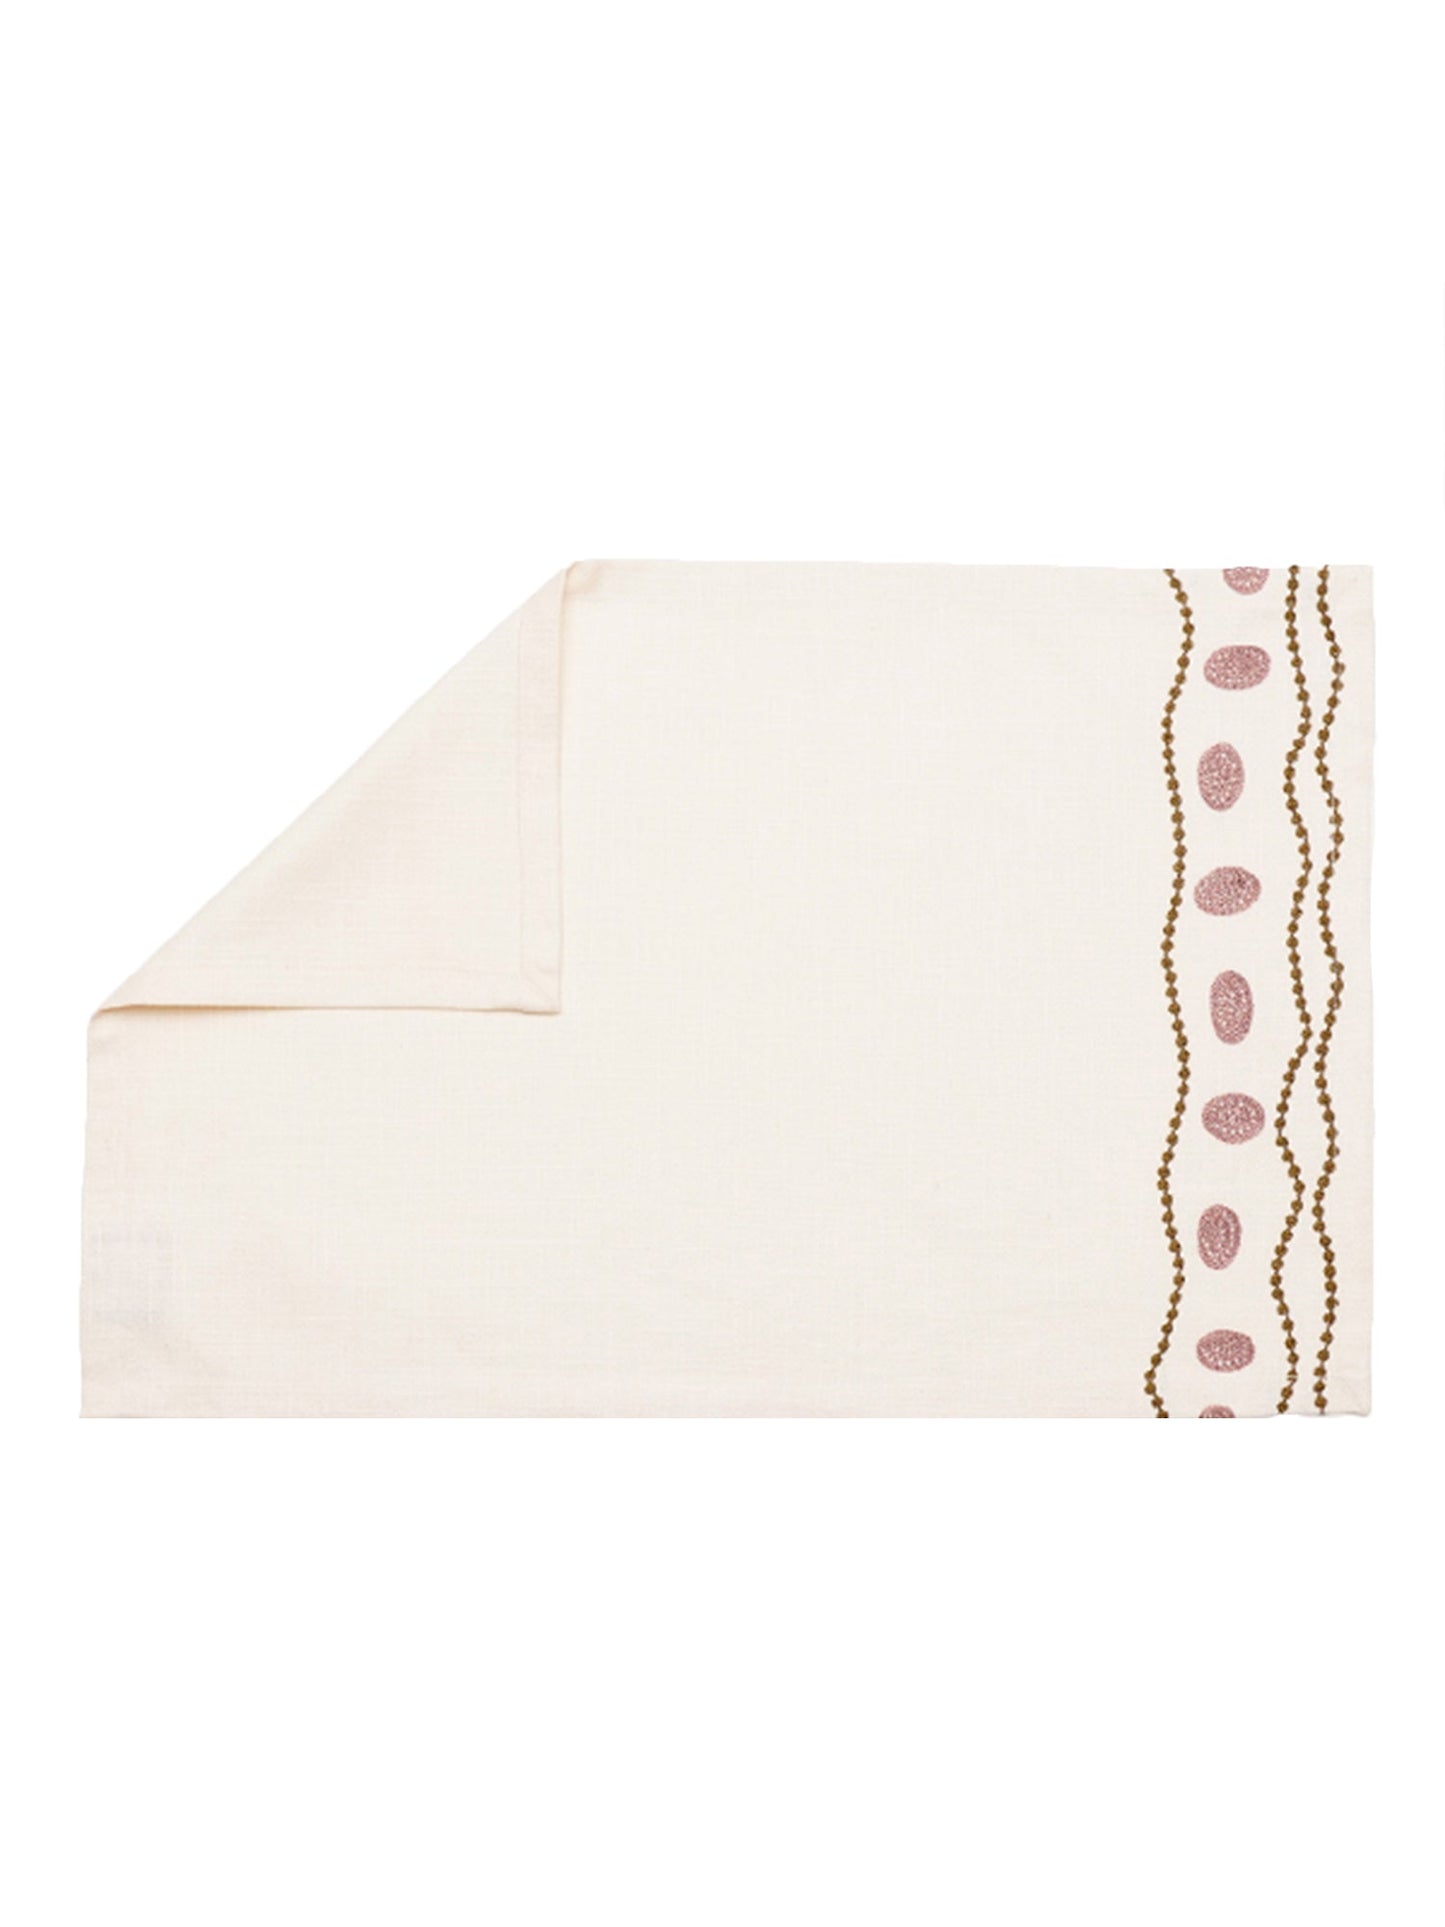 Table Mats and Napkins  Cotton Blend and 100% Cotton Embroidered Off-White and Coral - 13" x 19" ; 16" x 16" - Set of 6